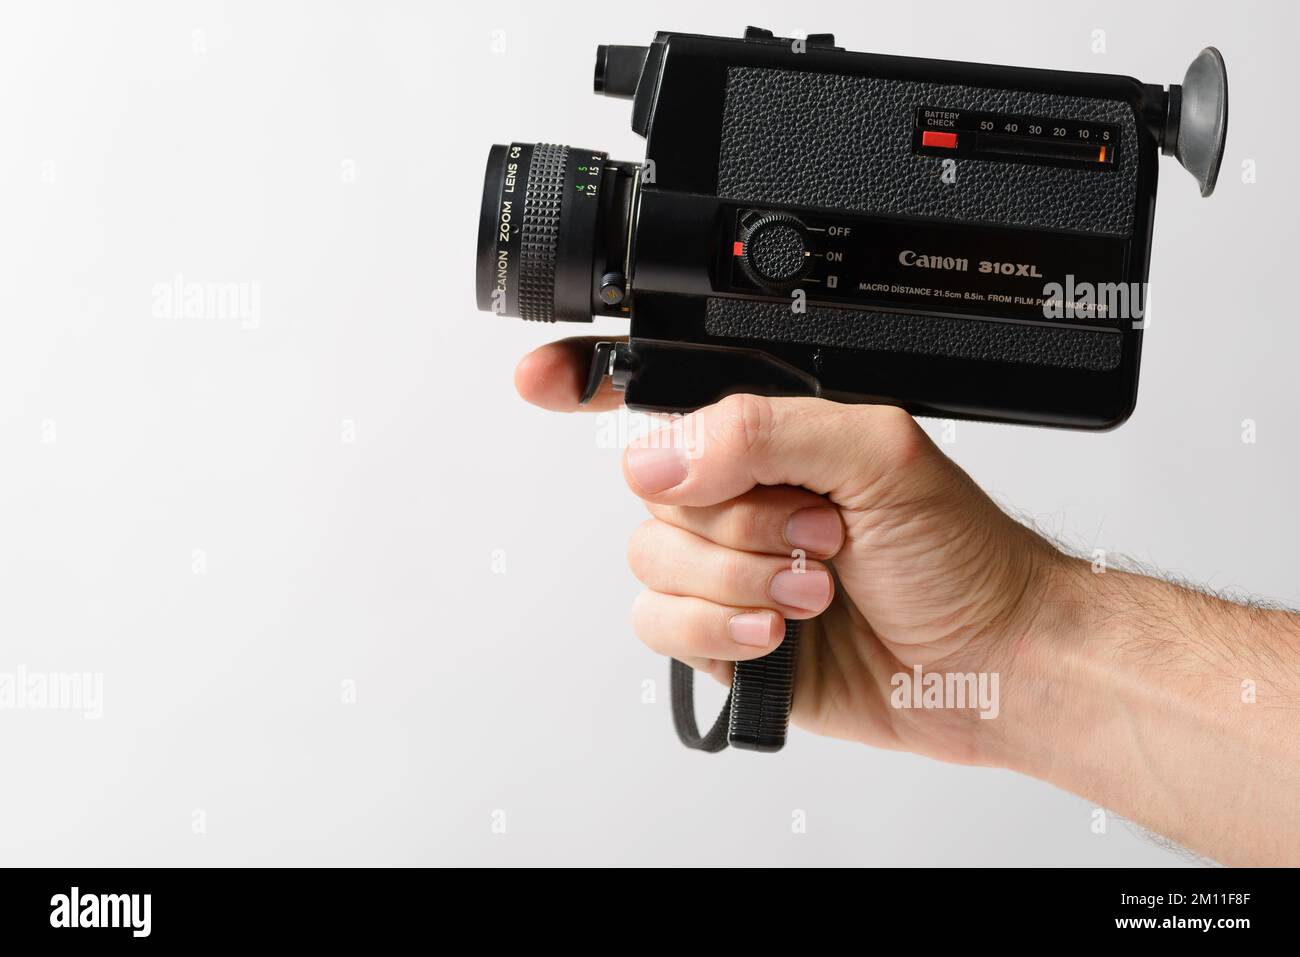 Izmir, Turkey - December 8, 2022: Hand holding a Canon 310xl Super 8mm amateur old fashion camera on a white background. Stock Photo